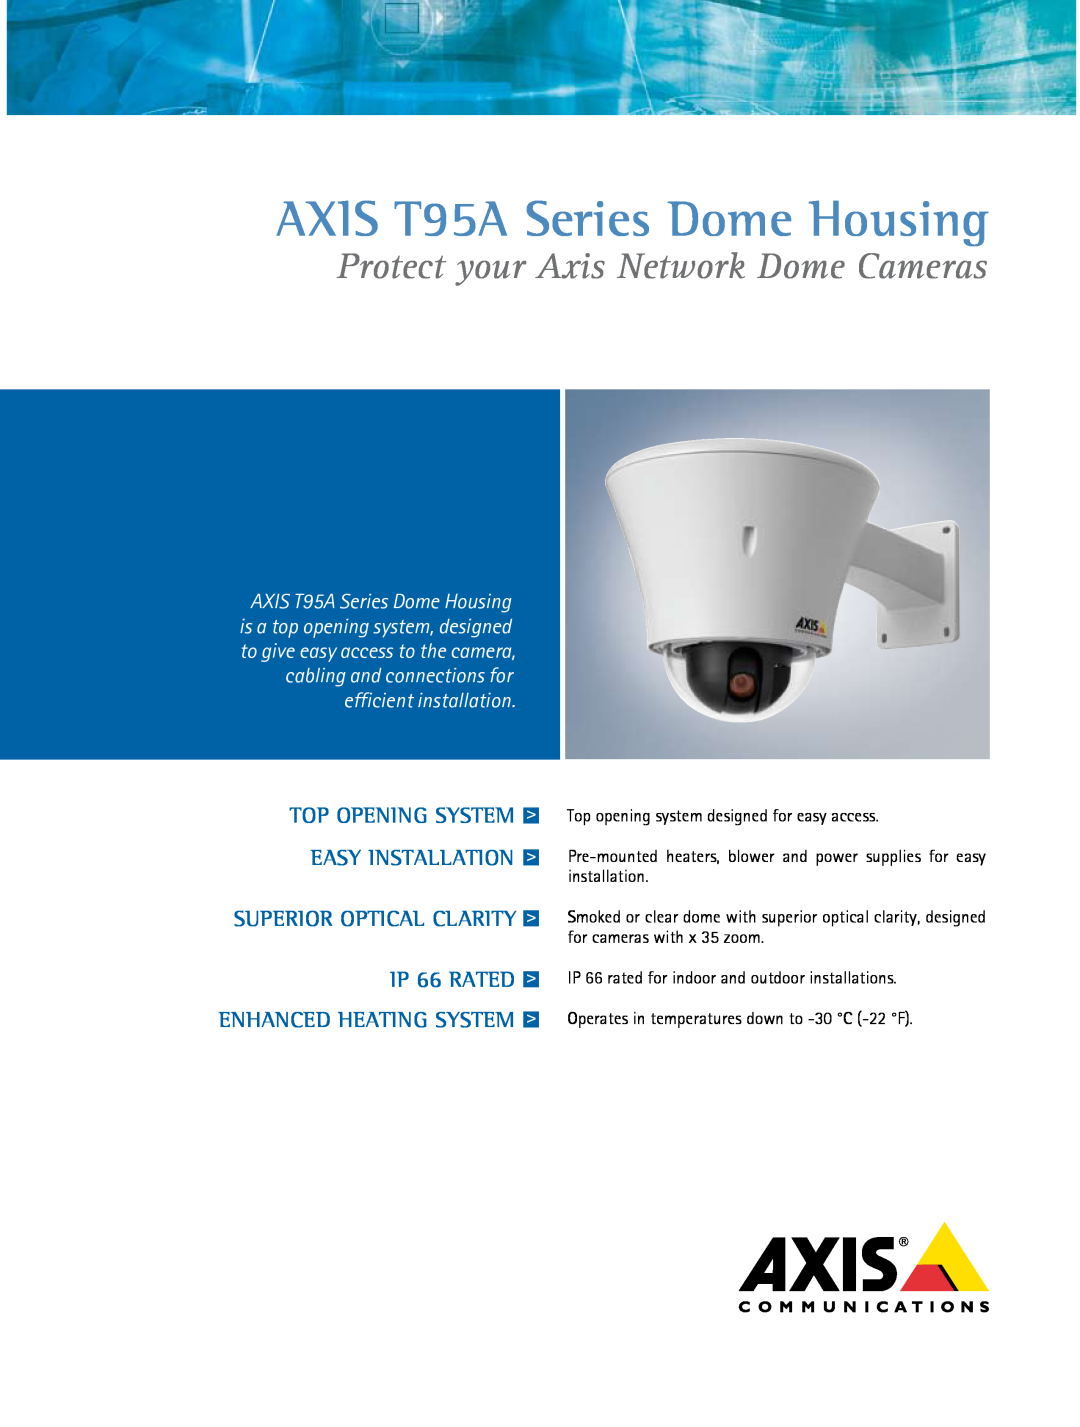 Axis Communications manual AXIS T95A Series Dome Housing, Protect your Axis Network Dome Cameras 